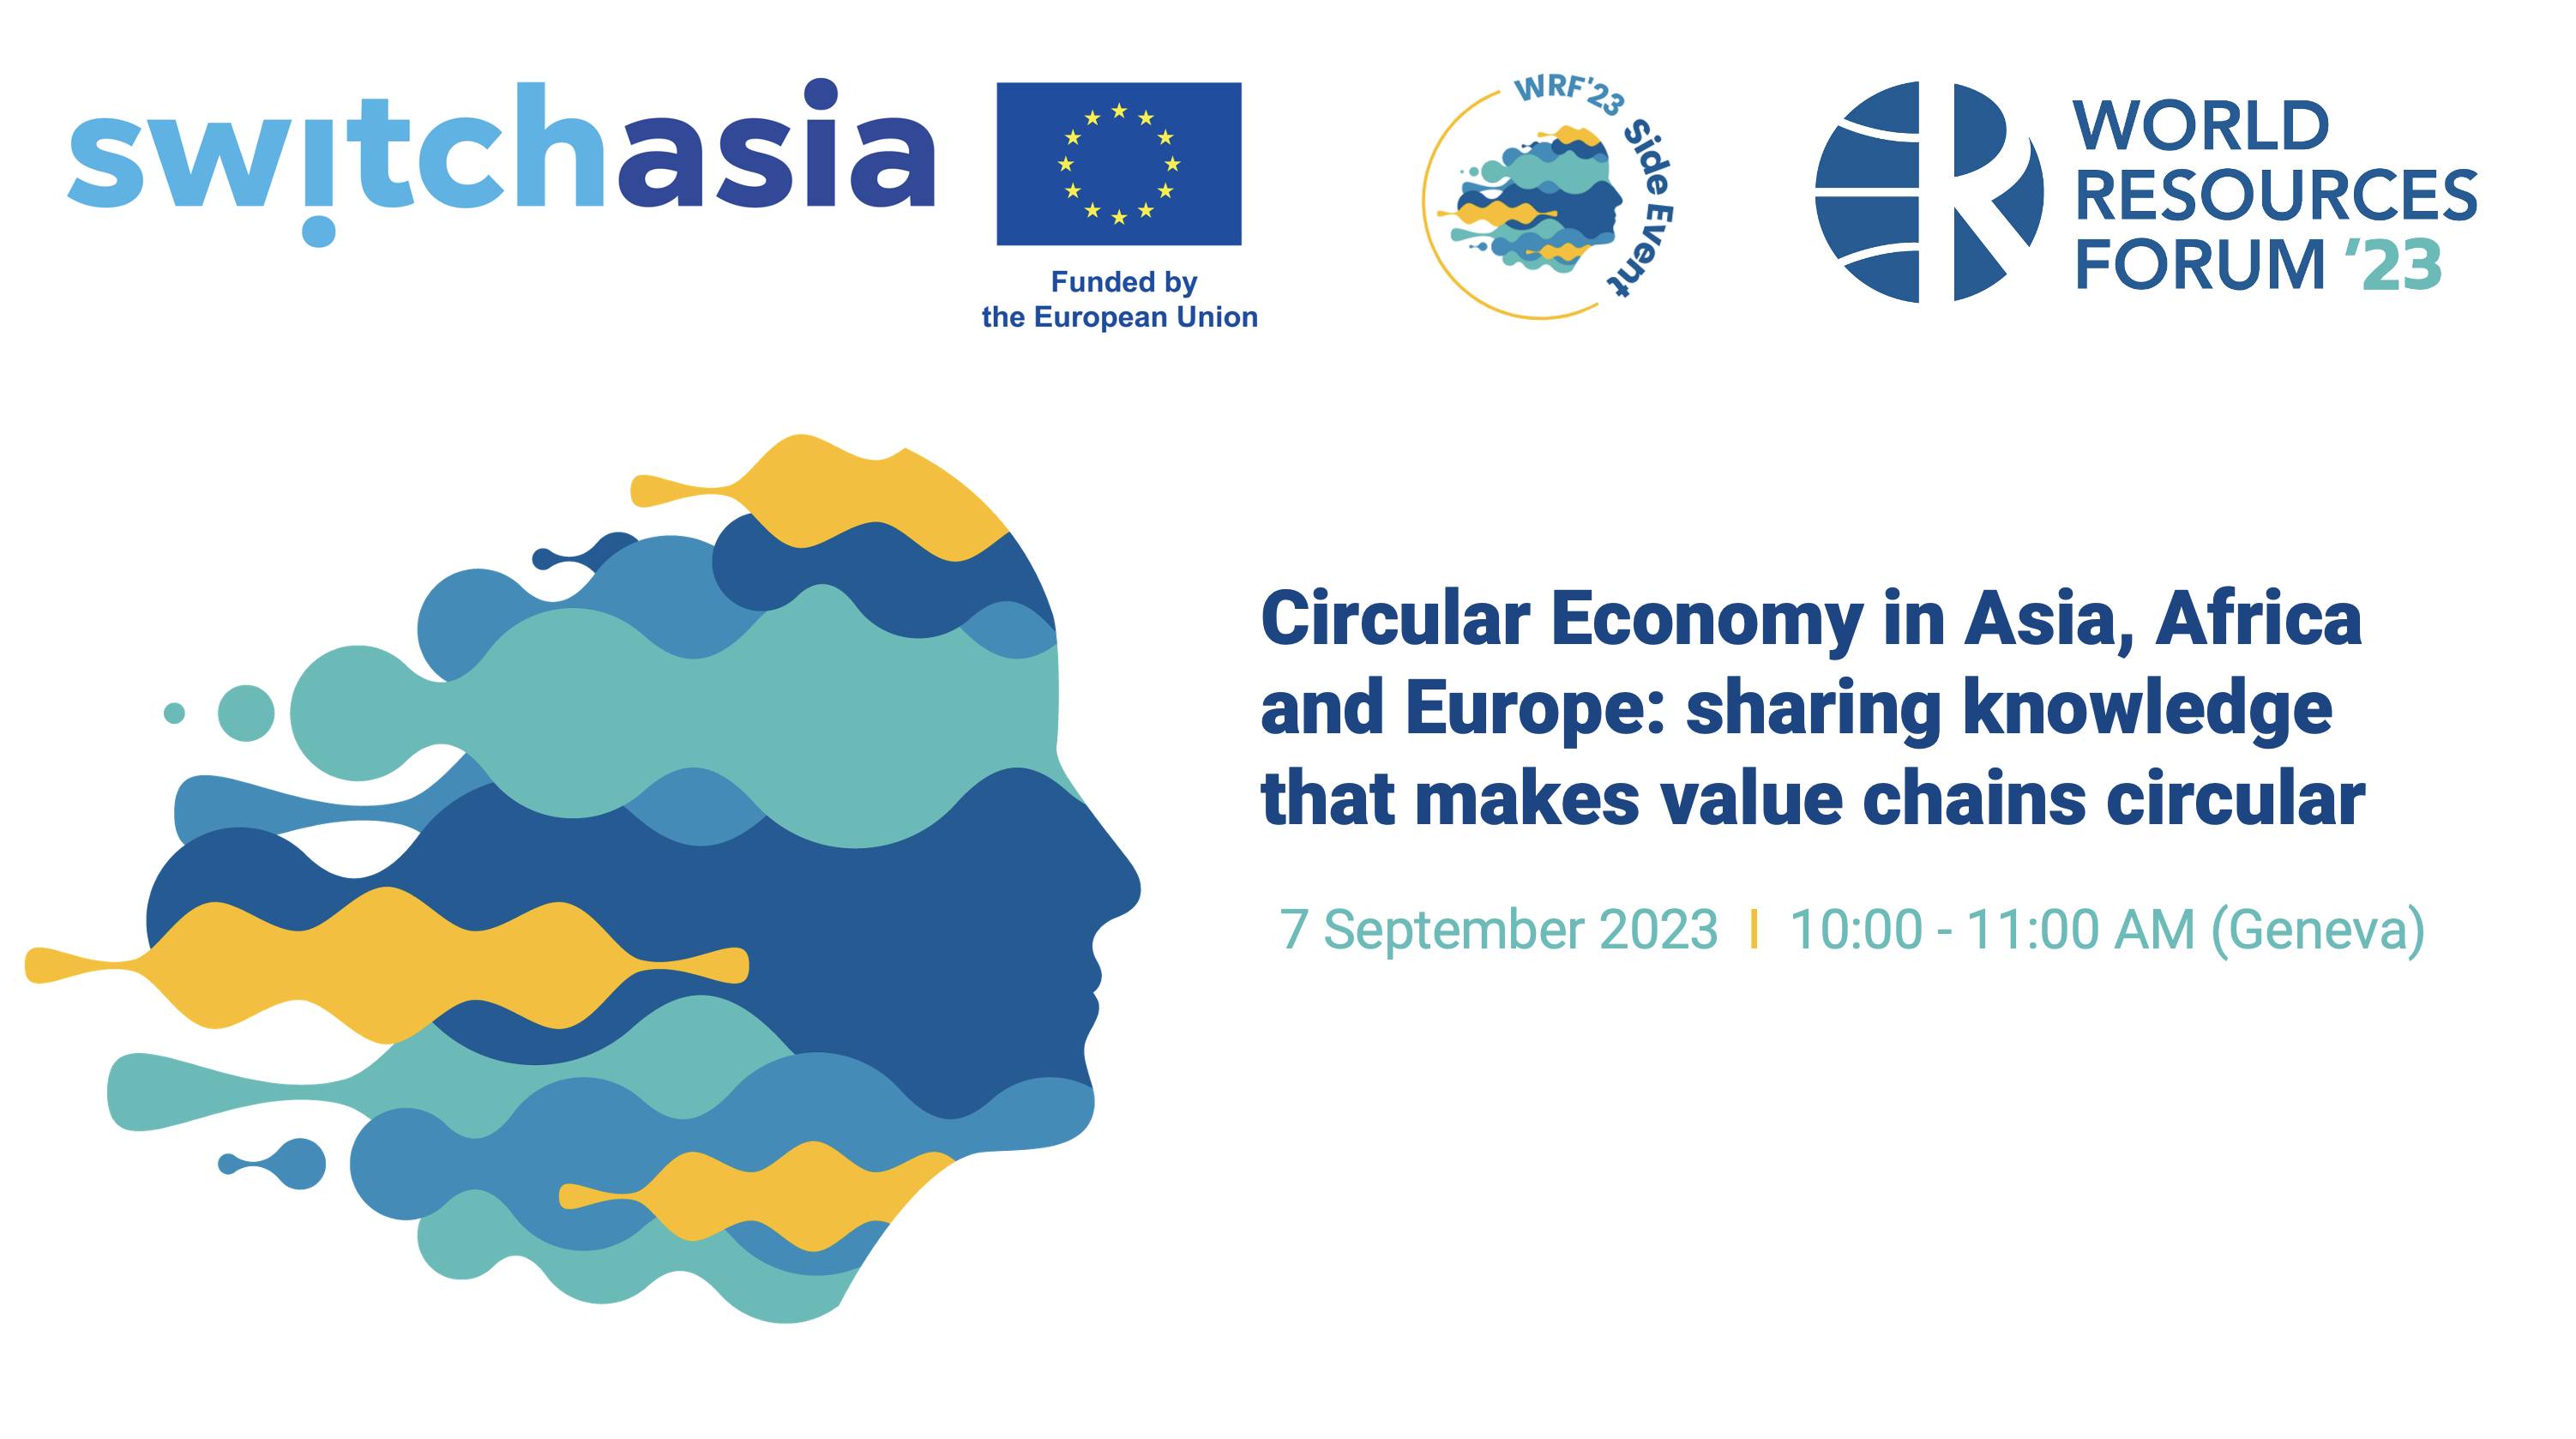 Circular Economy in Asia, Africa and Europe: sharing knowledge that makes value chains circular